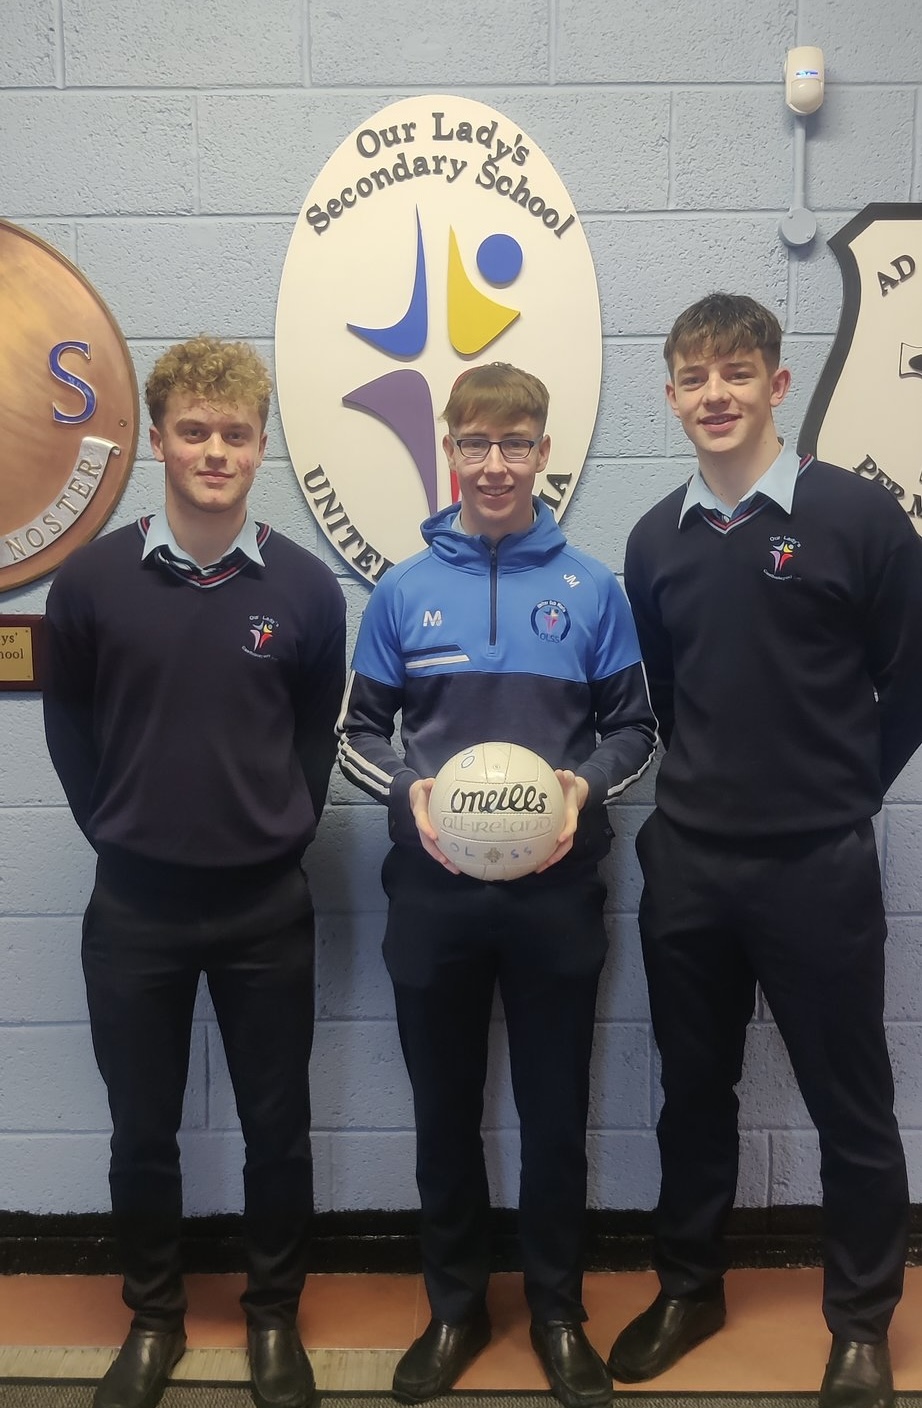 Three Ulster Schools All Stars for Our Lady’s